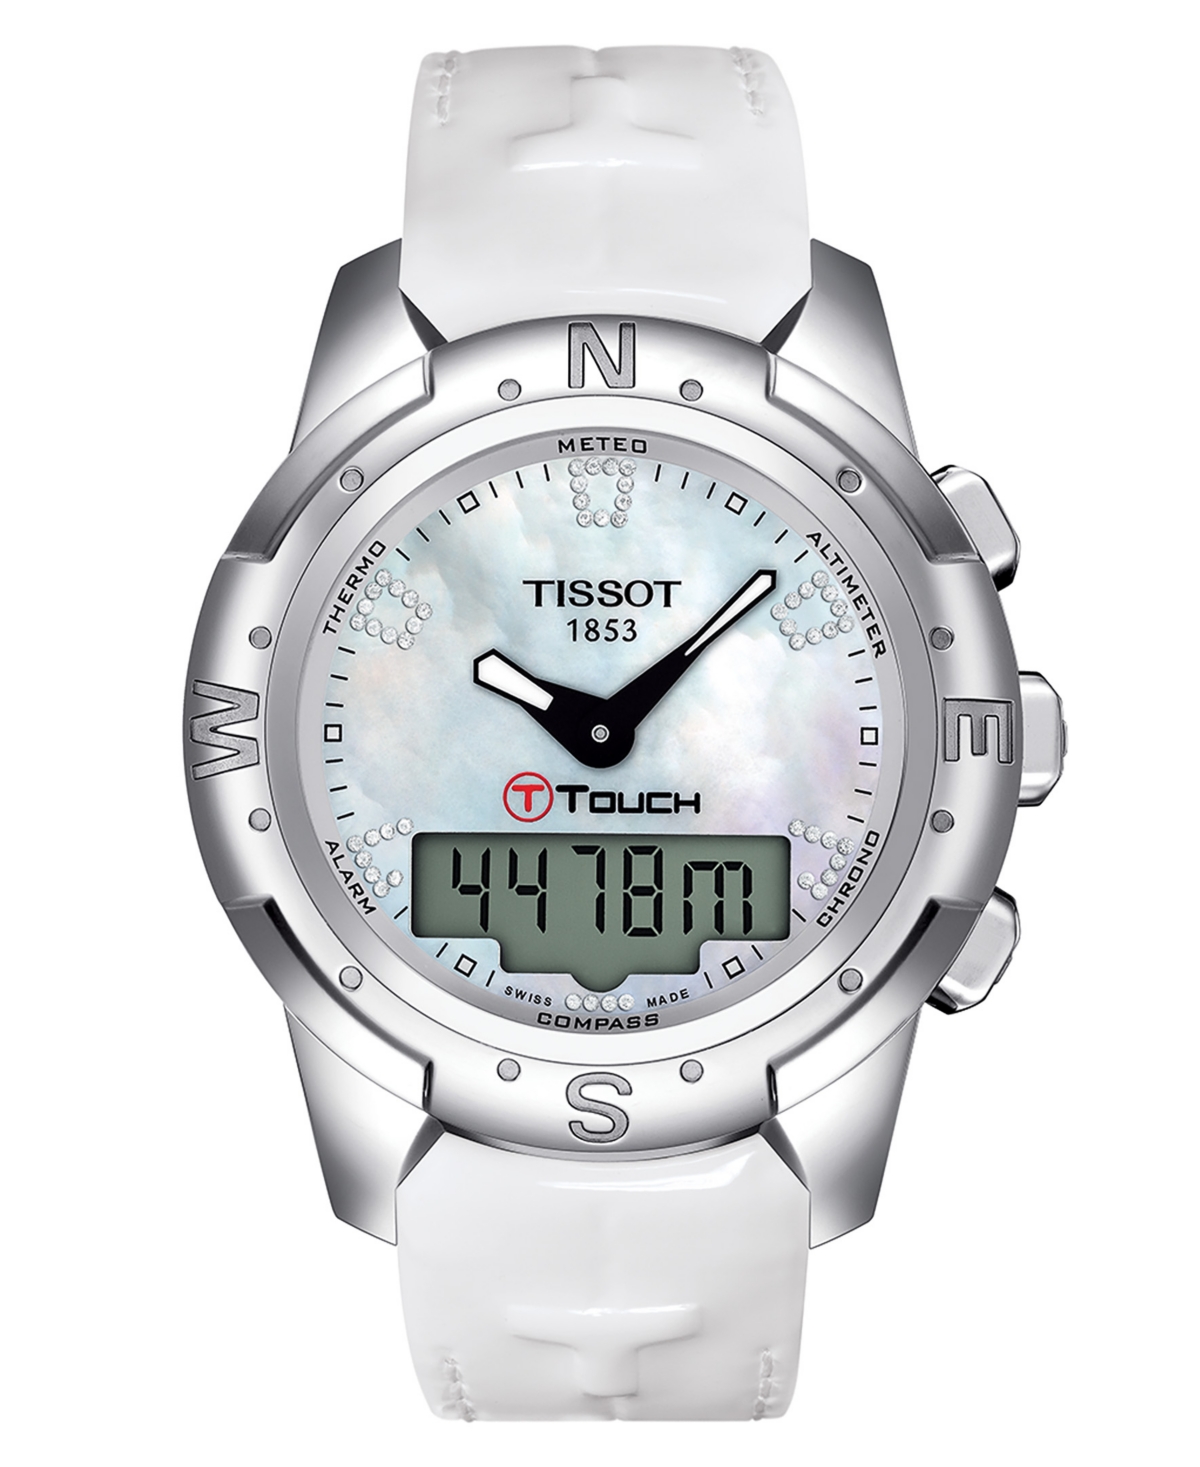 Tissot Women's Digital T-touch Ii Titanium Lady Diamond (1/2 Ct. T.w.) White Leather Strap Watch 43mm In White Mother Of Pearl